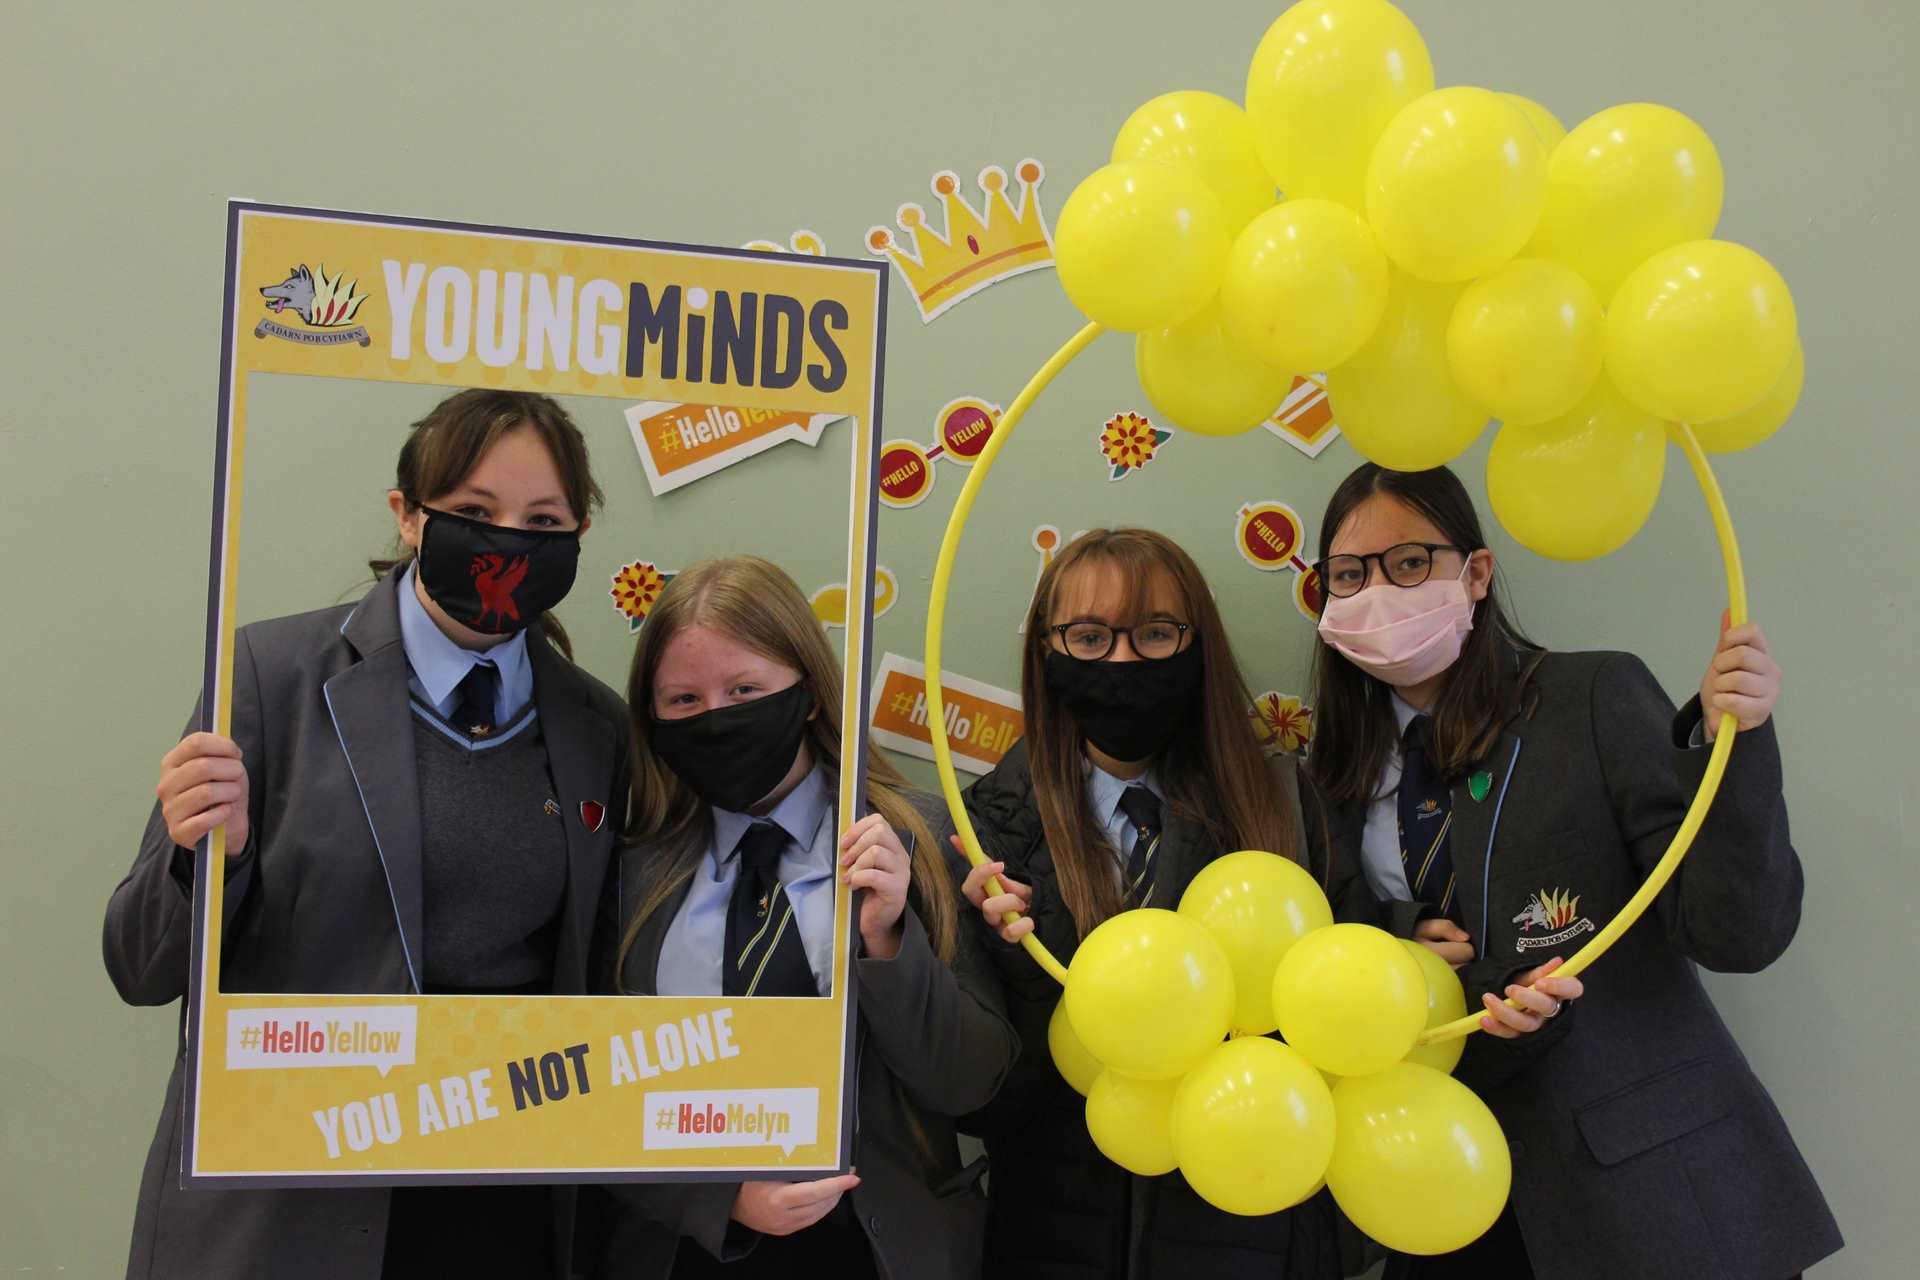 Four students all with masks pose and stand together. Two are in a yellow photo frame and the other two are in a yellow hoop with balloons on.